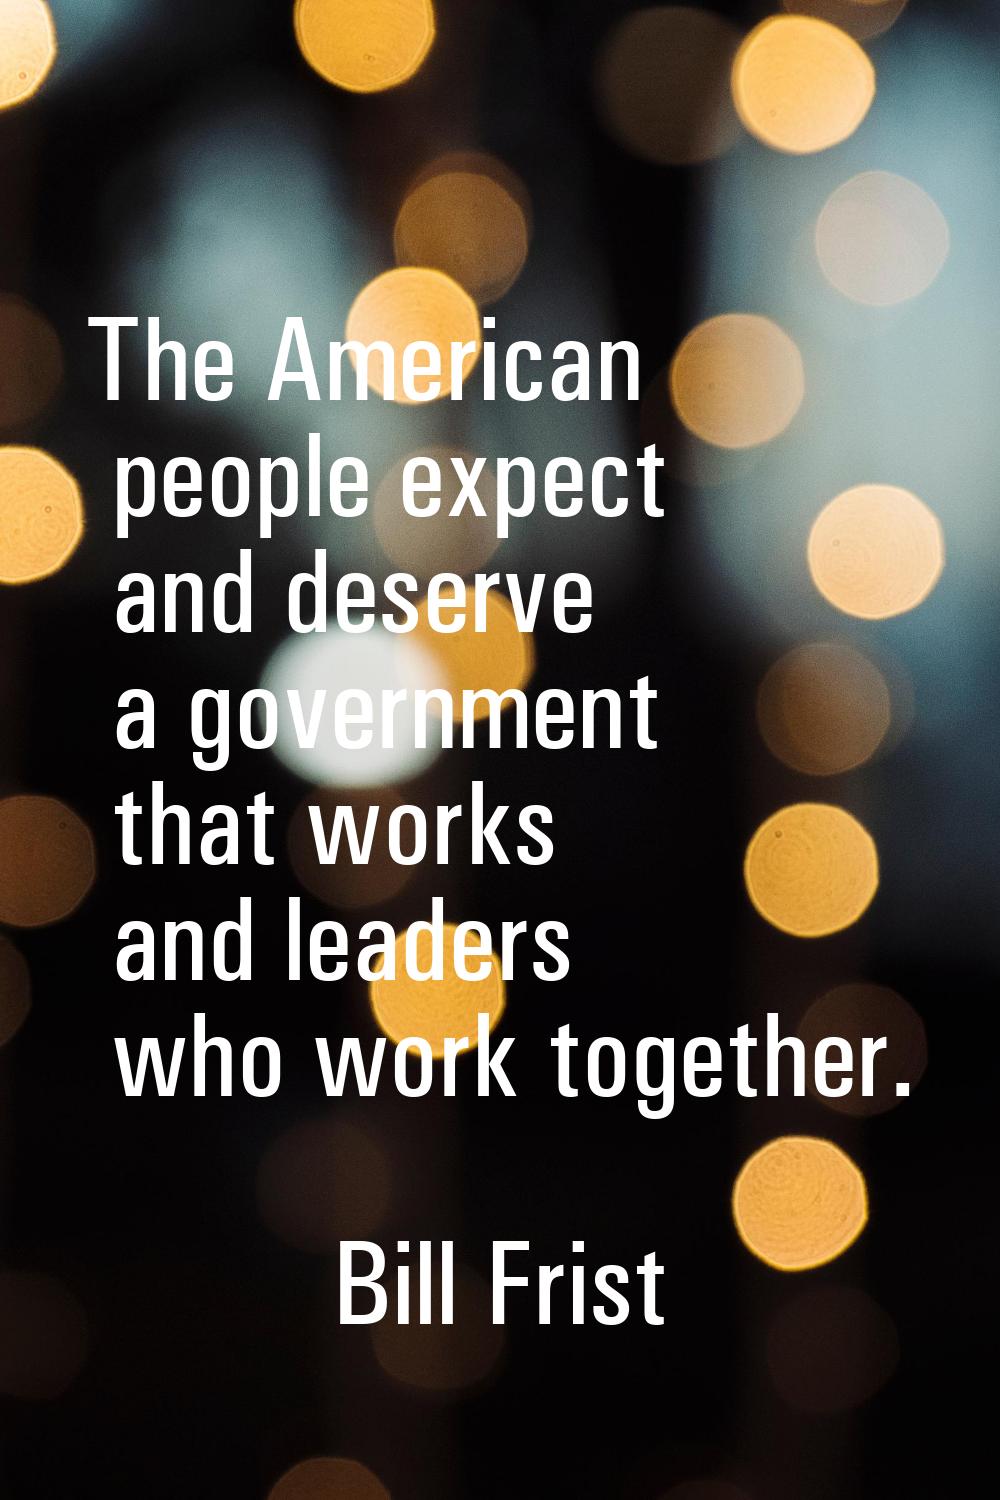 The American people expect and deserve a government that works and leaders who work together.